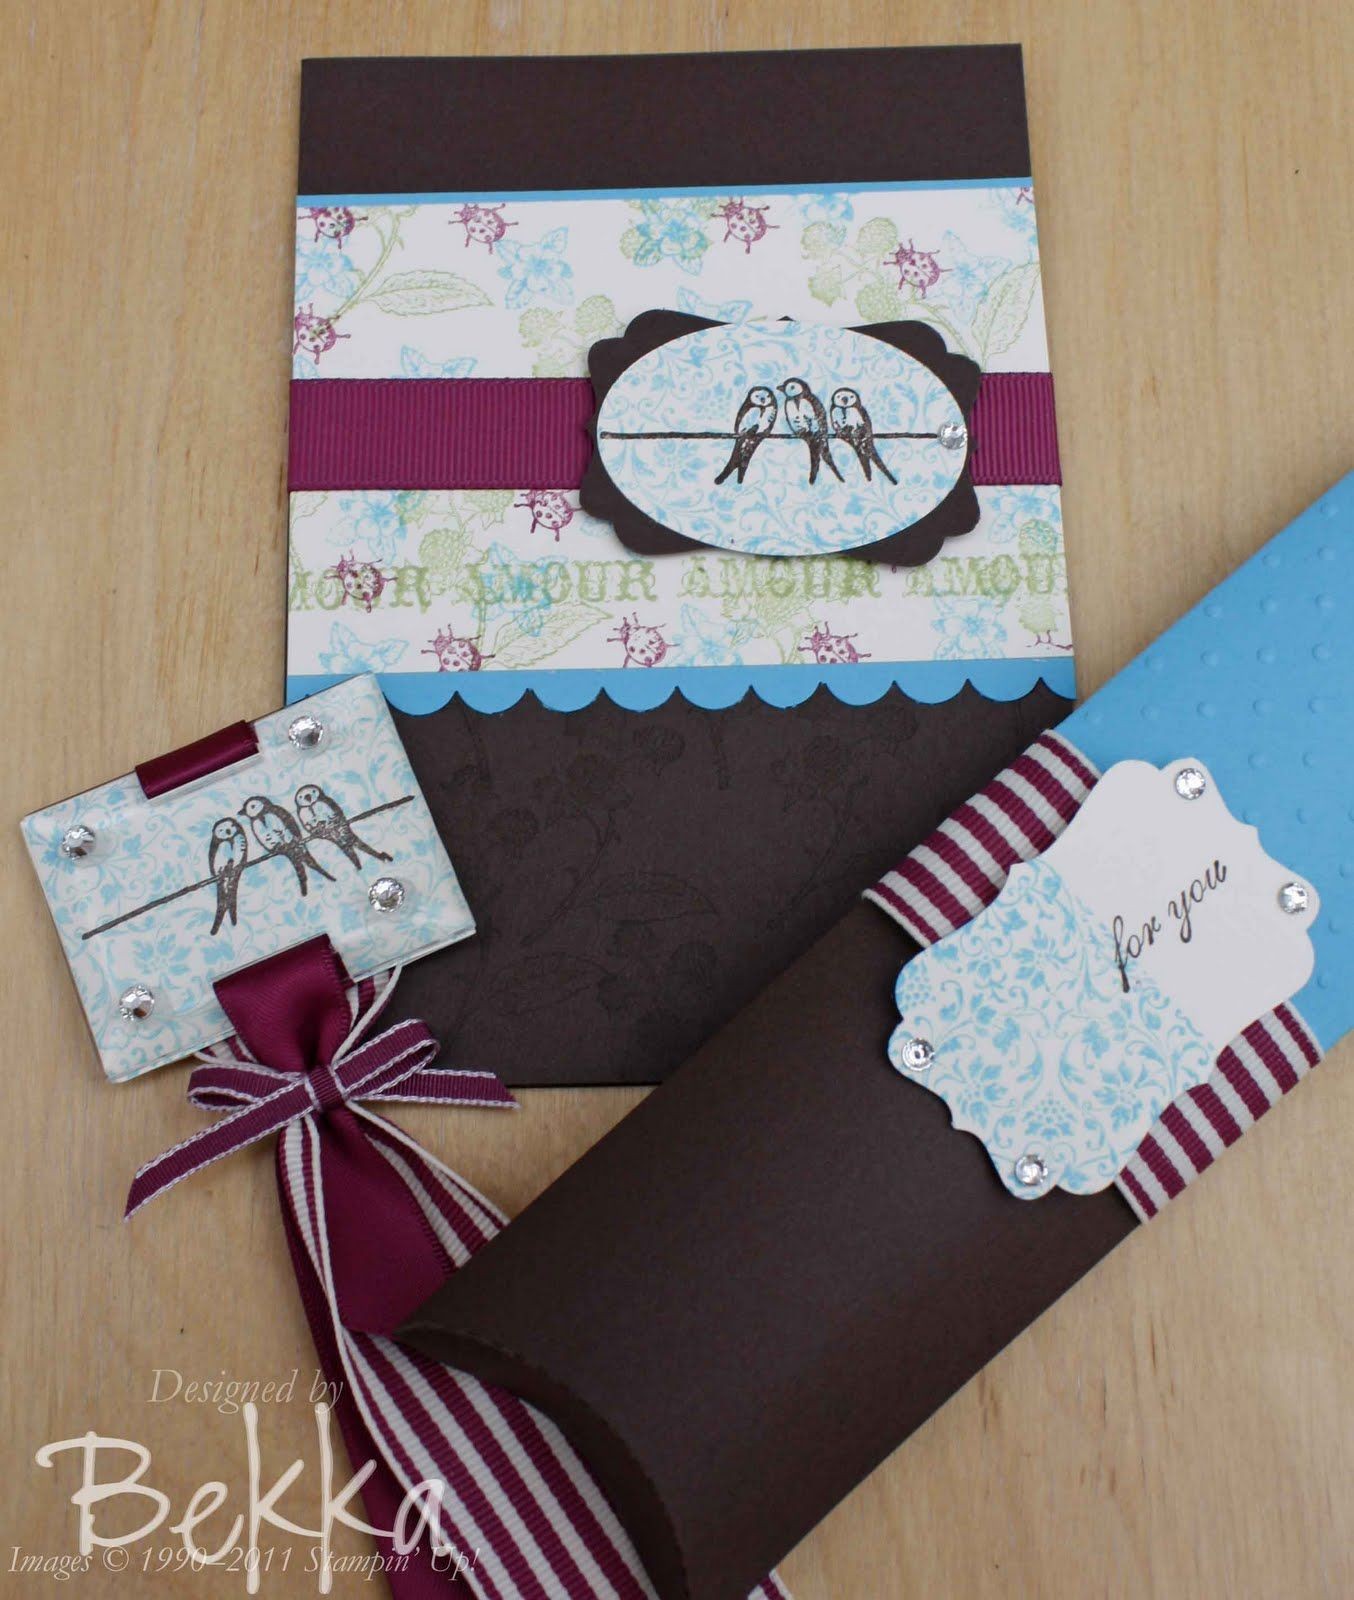 Papercraft Sets Clearly for You Bookmark Gift Set Card by Bekka Prideaux From